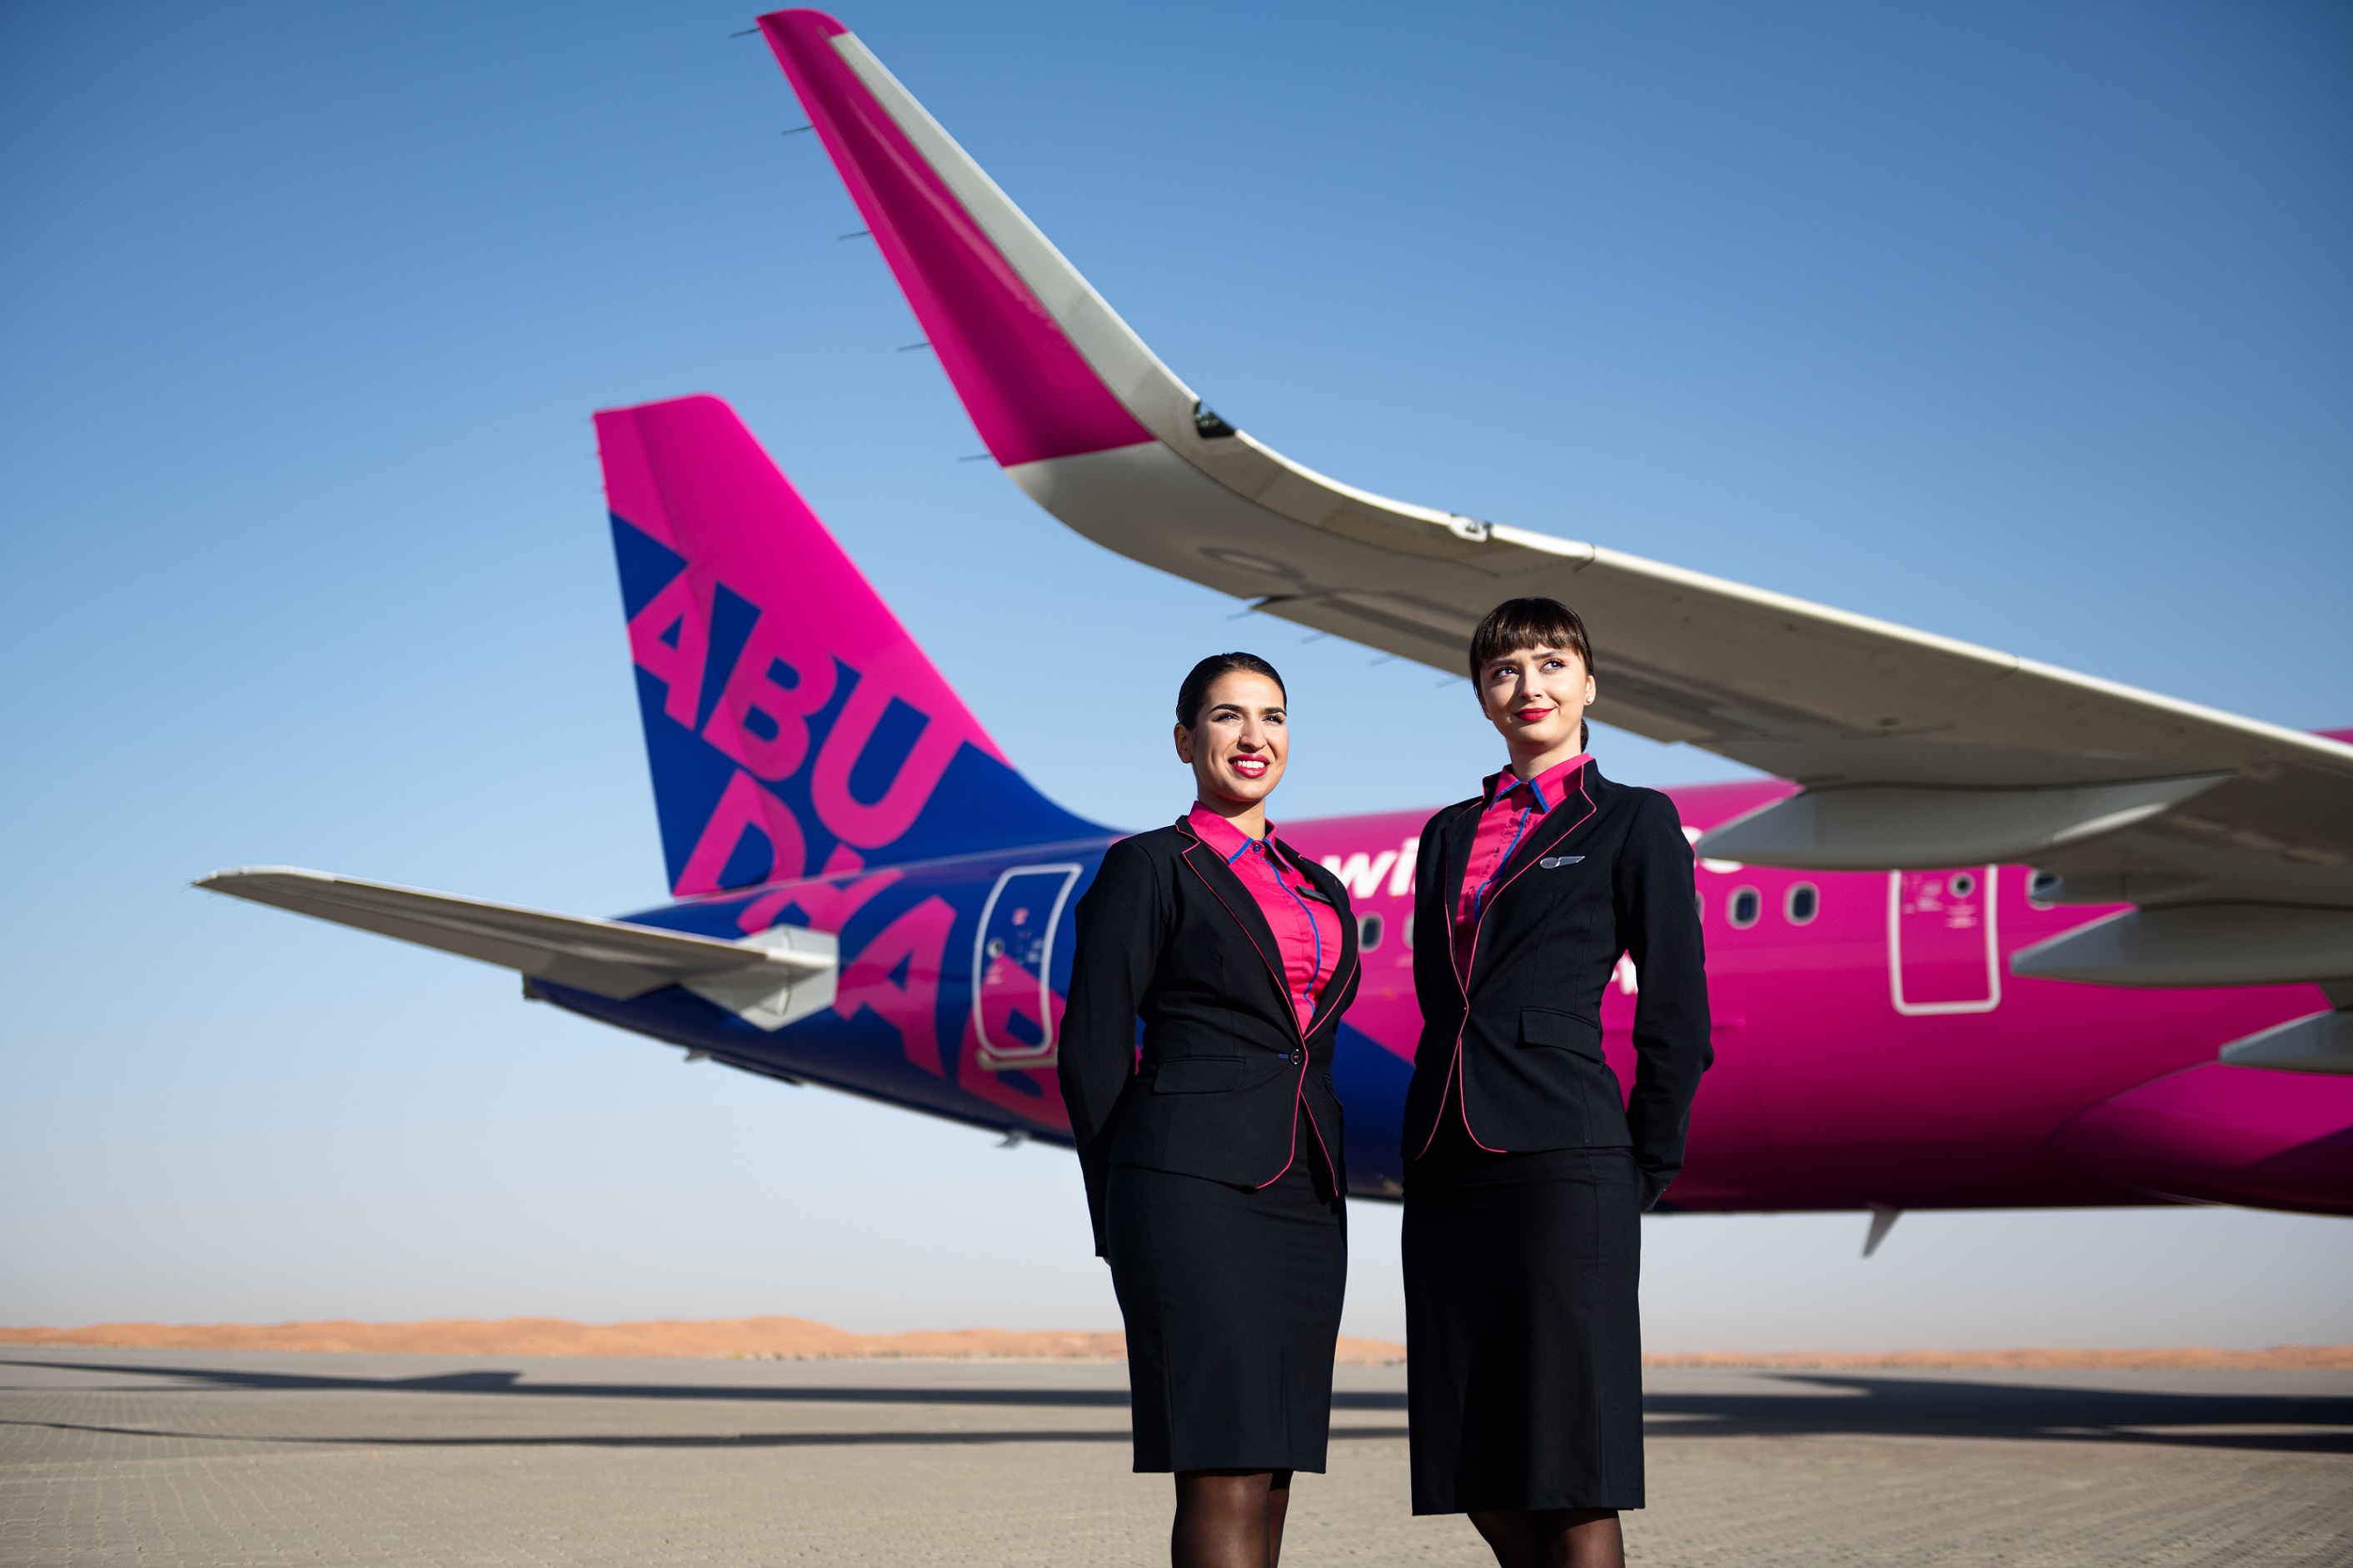 Wizz Air Abu Dhabi Launches New Routes To Almaty And Nur-Sultan, Kazakhstan